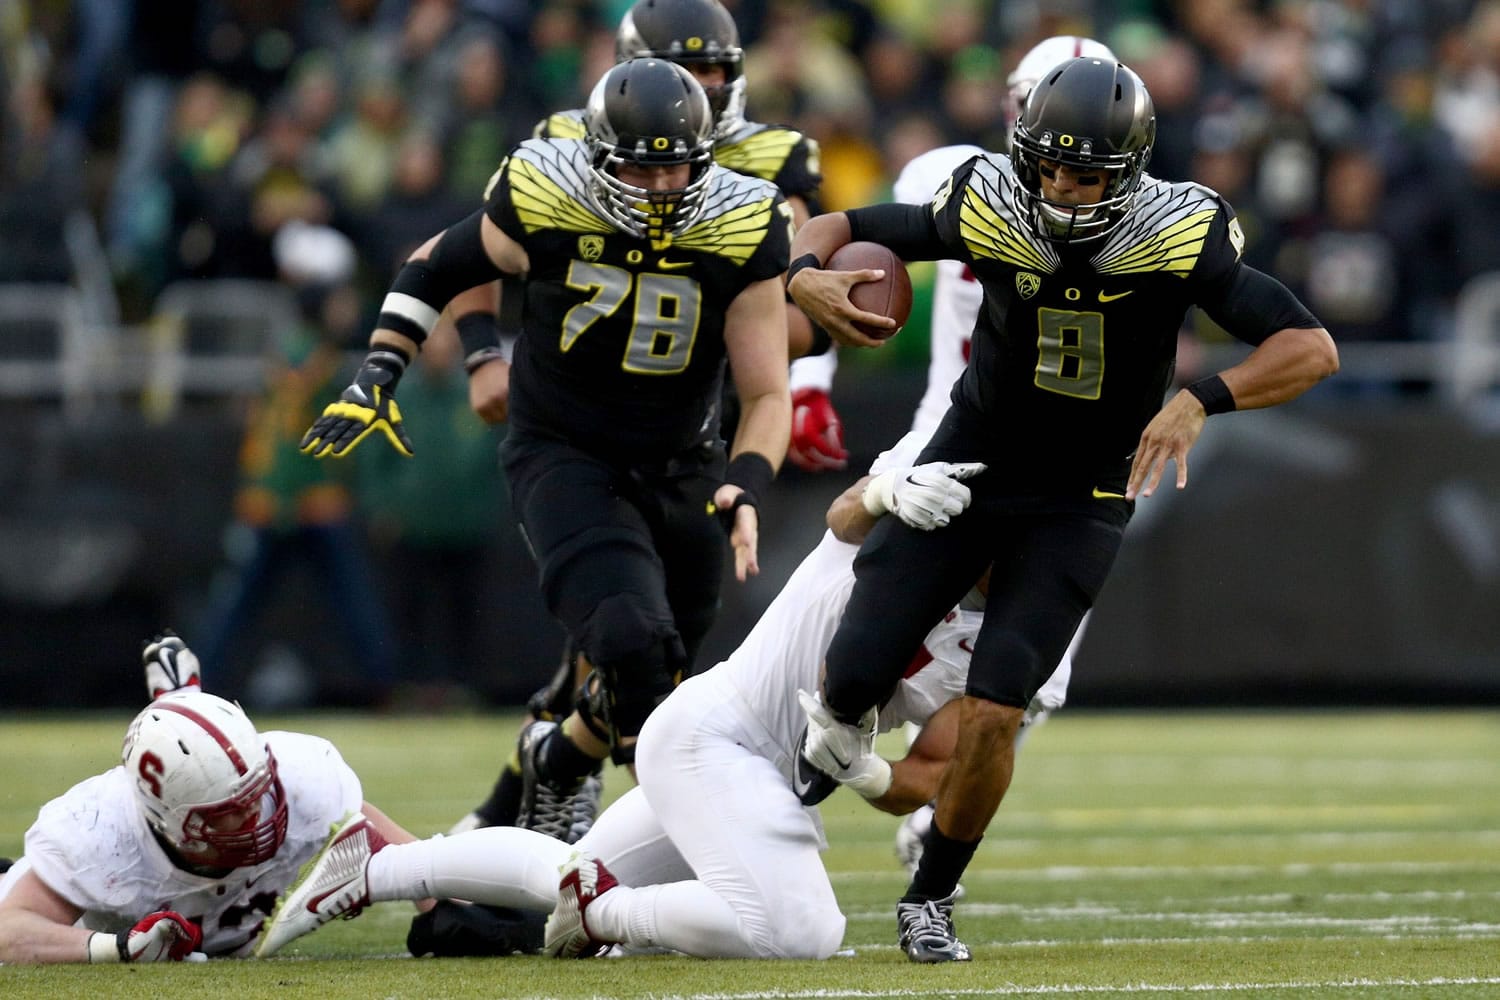 Oregon quarterback Marcus Mariota (8) tries to get away from the defender during the second quarter against Stanford on Saturday, Nov. 1, 2014.